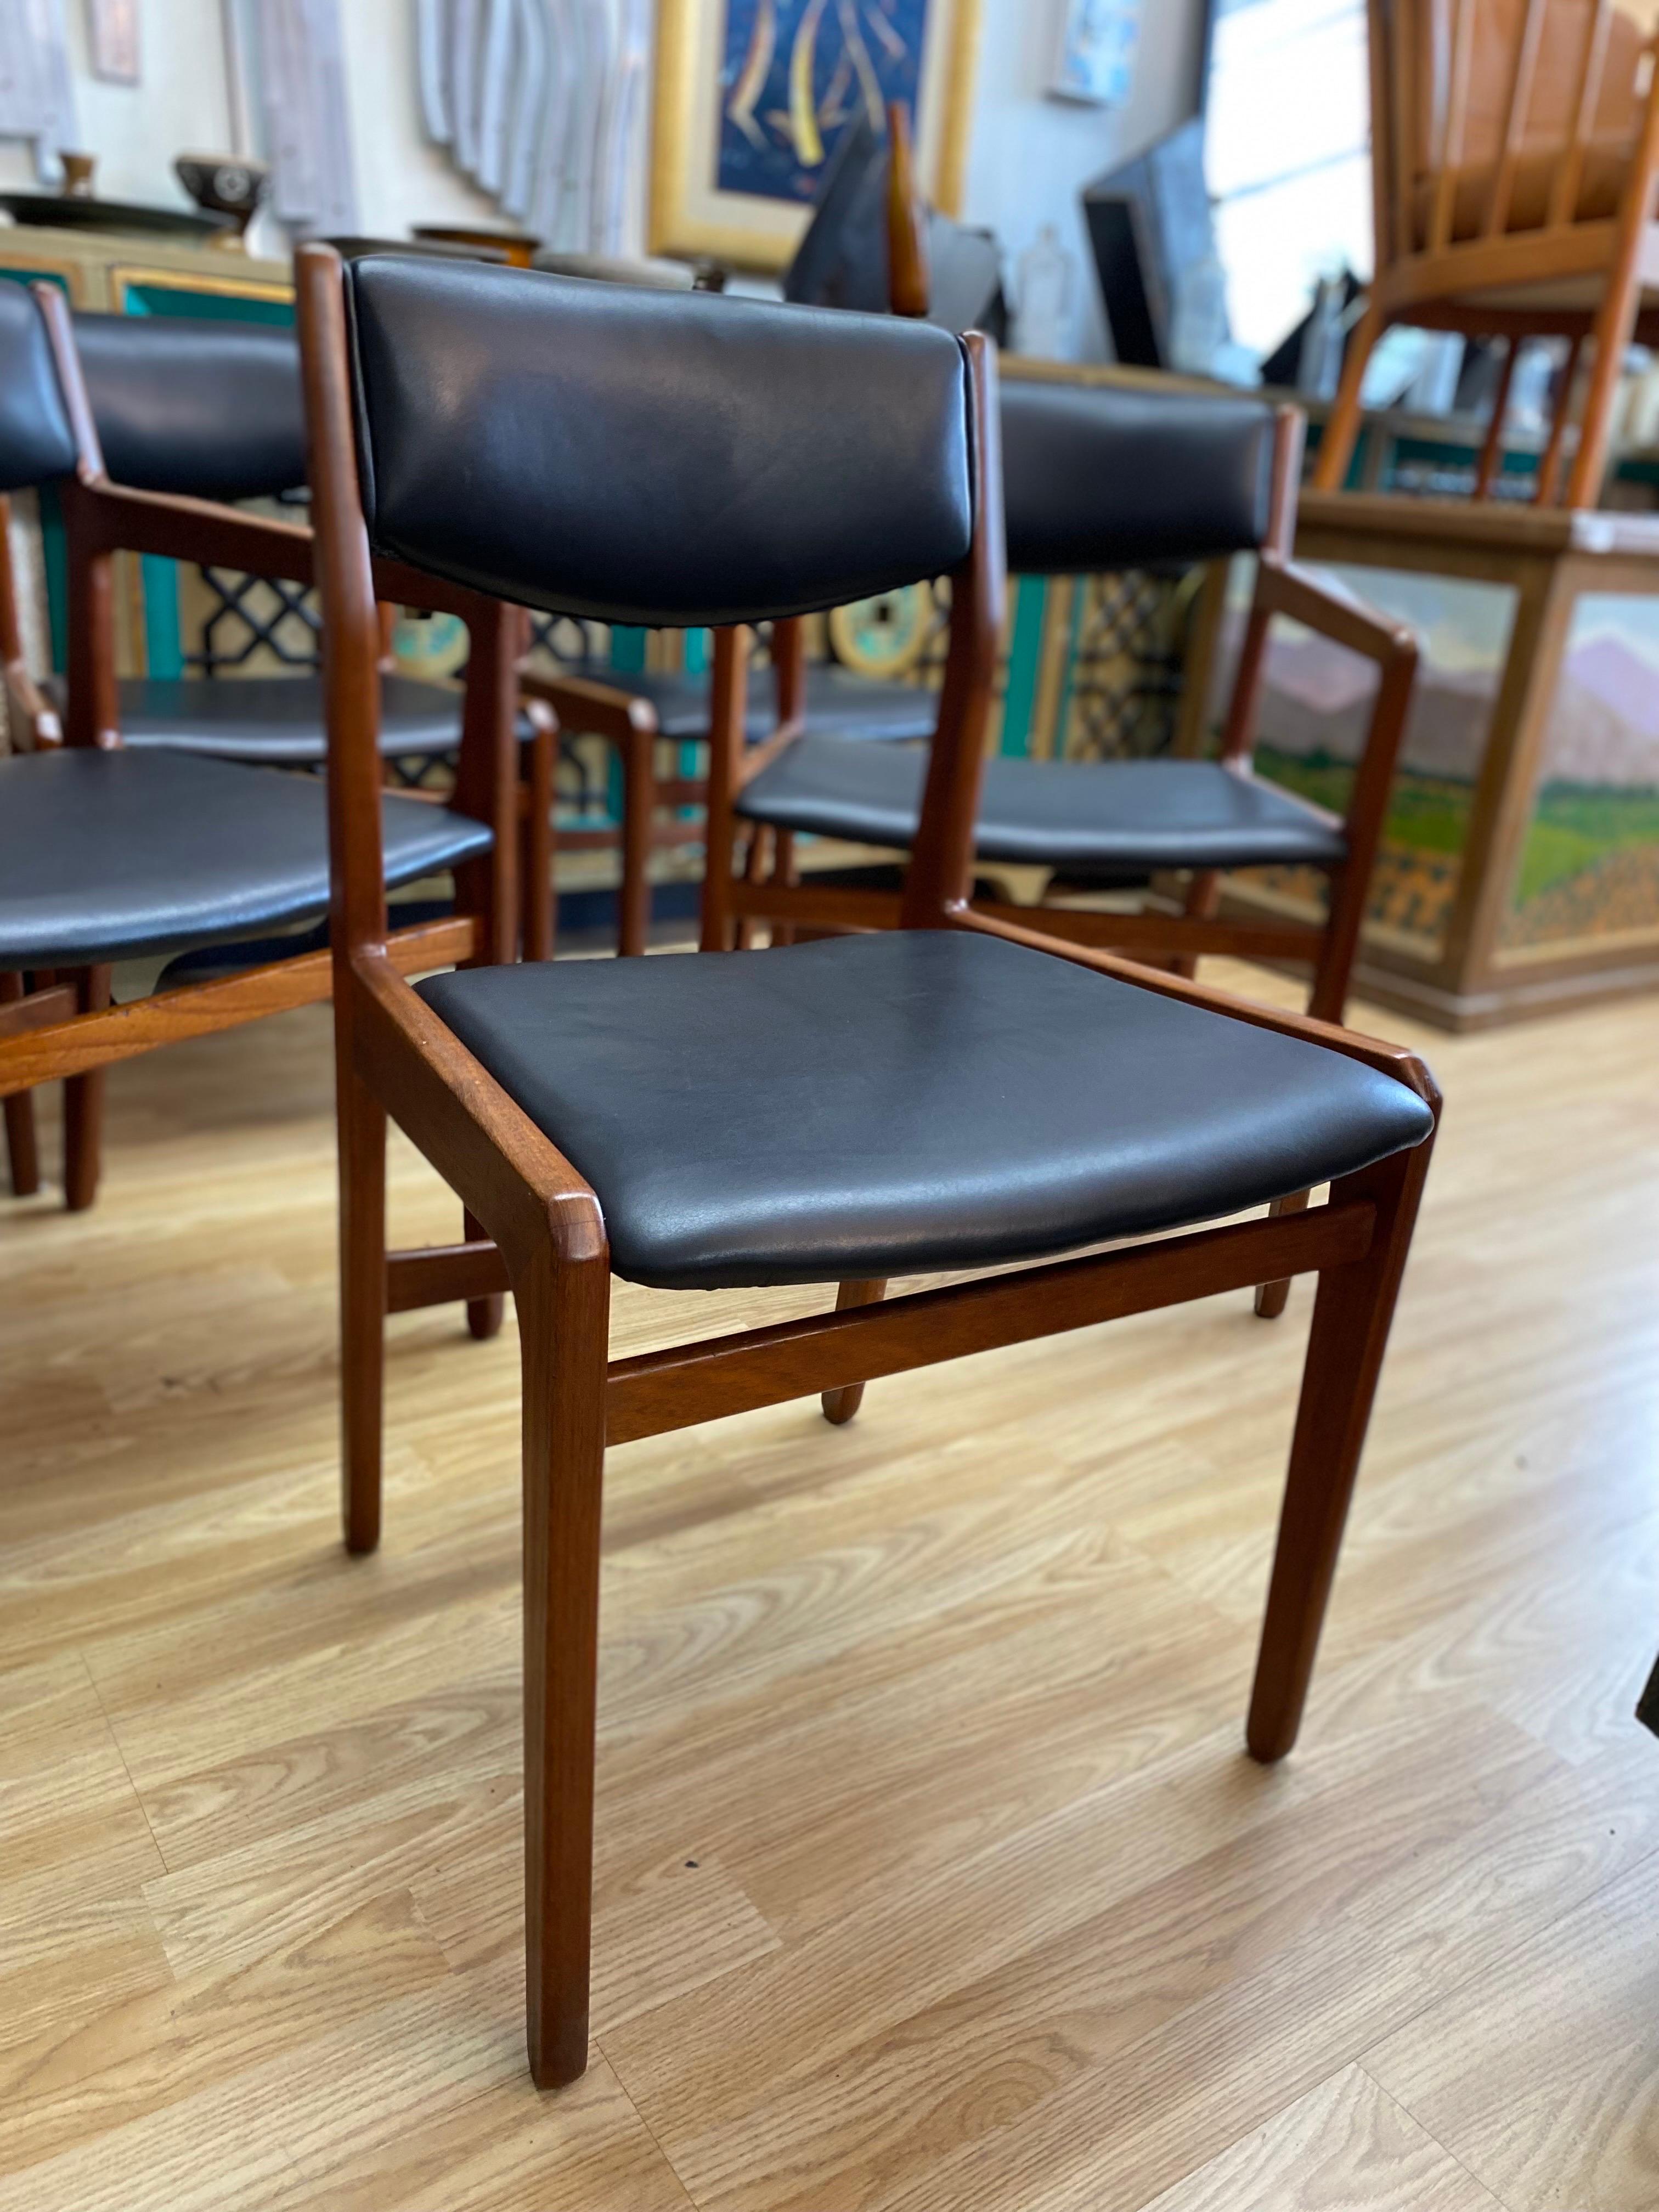 Set of 6 teak Danish modern dining chairs designed by Knud Andersen made of teak with leather seating and back resets. Danish mid-century modern dining chairs features 2 captain/arm chairs and 4 armless chairs. 

Dimension captain chairs: